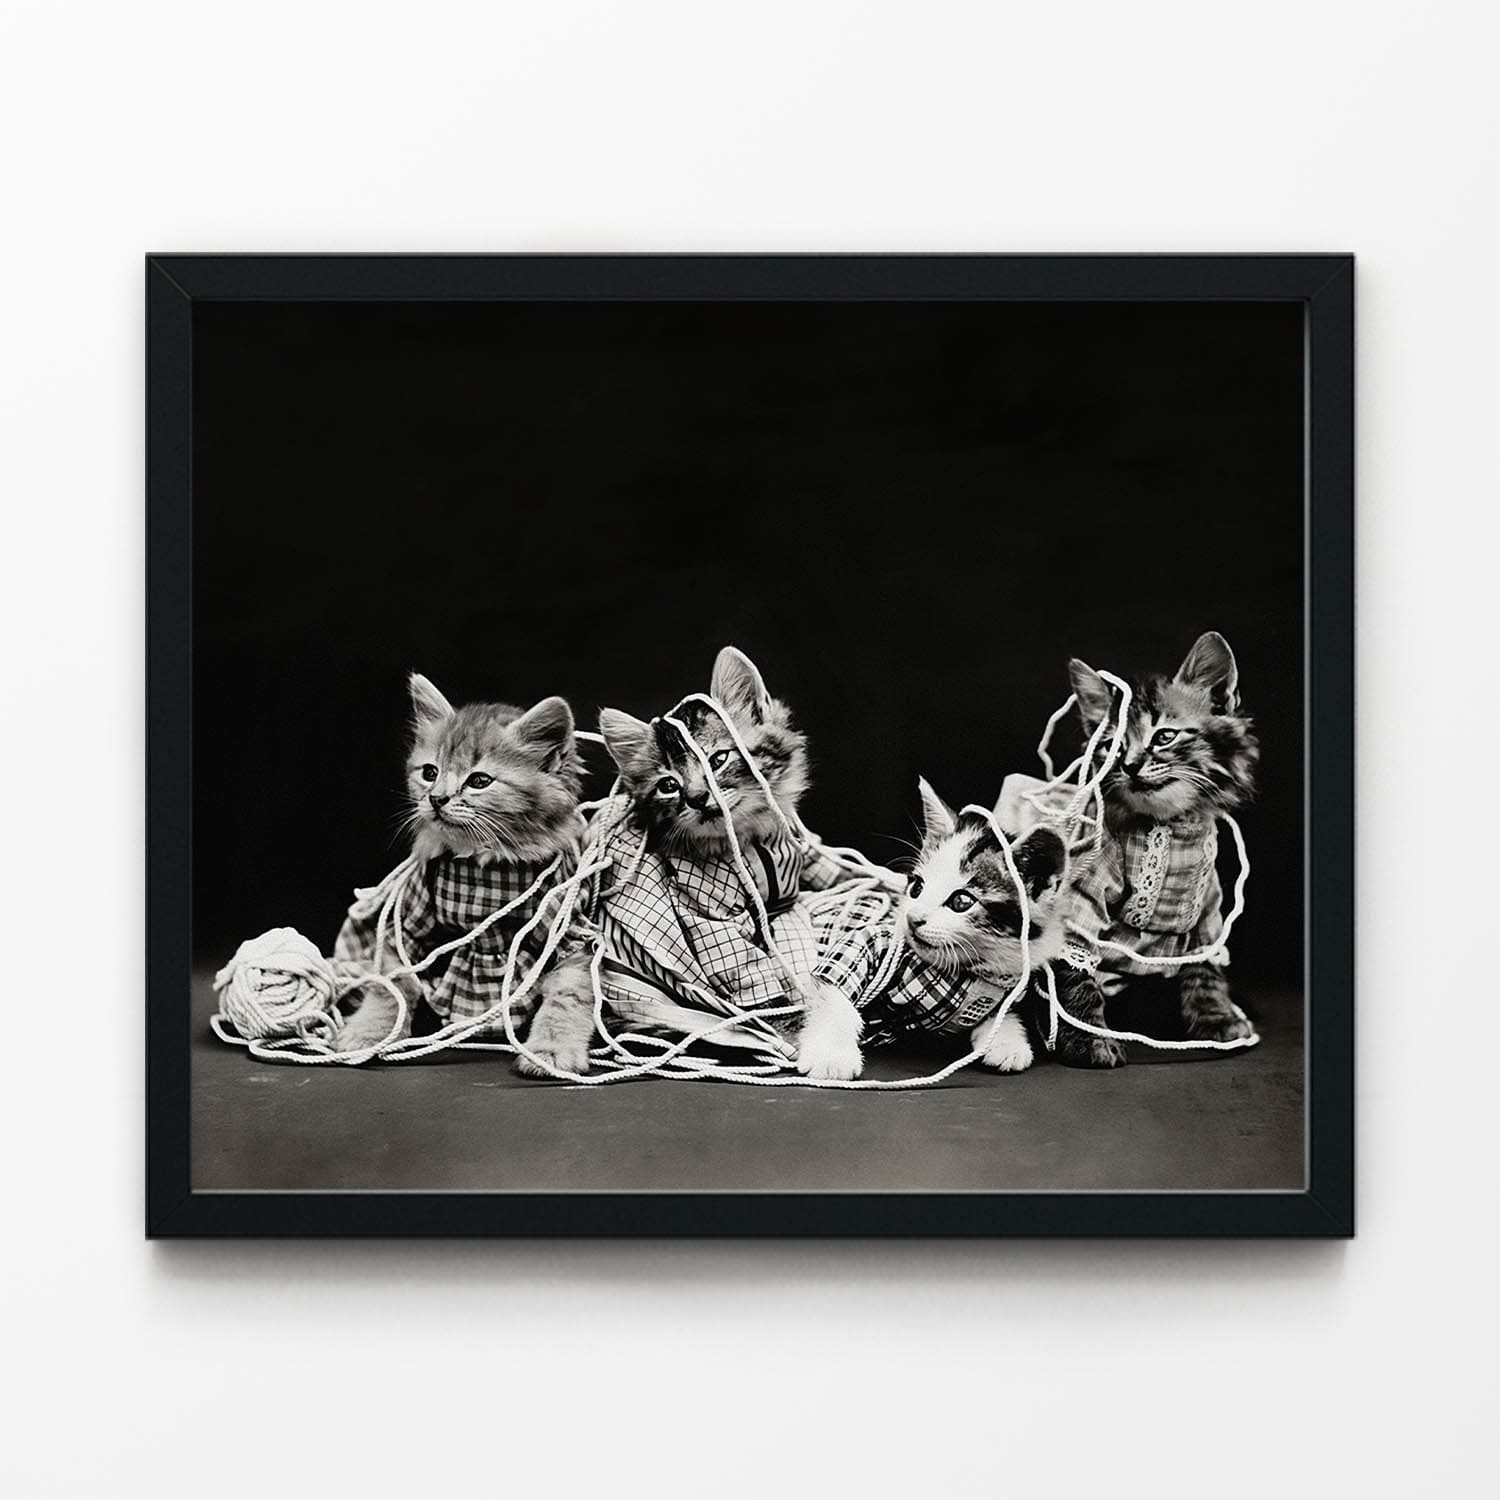 Cats Tangled in Yarn Art Print in Black Picture Frame